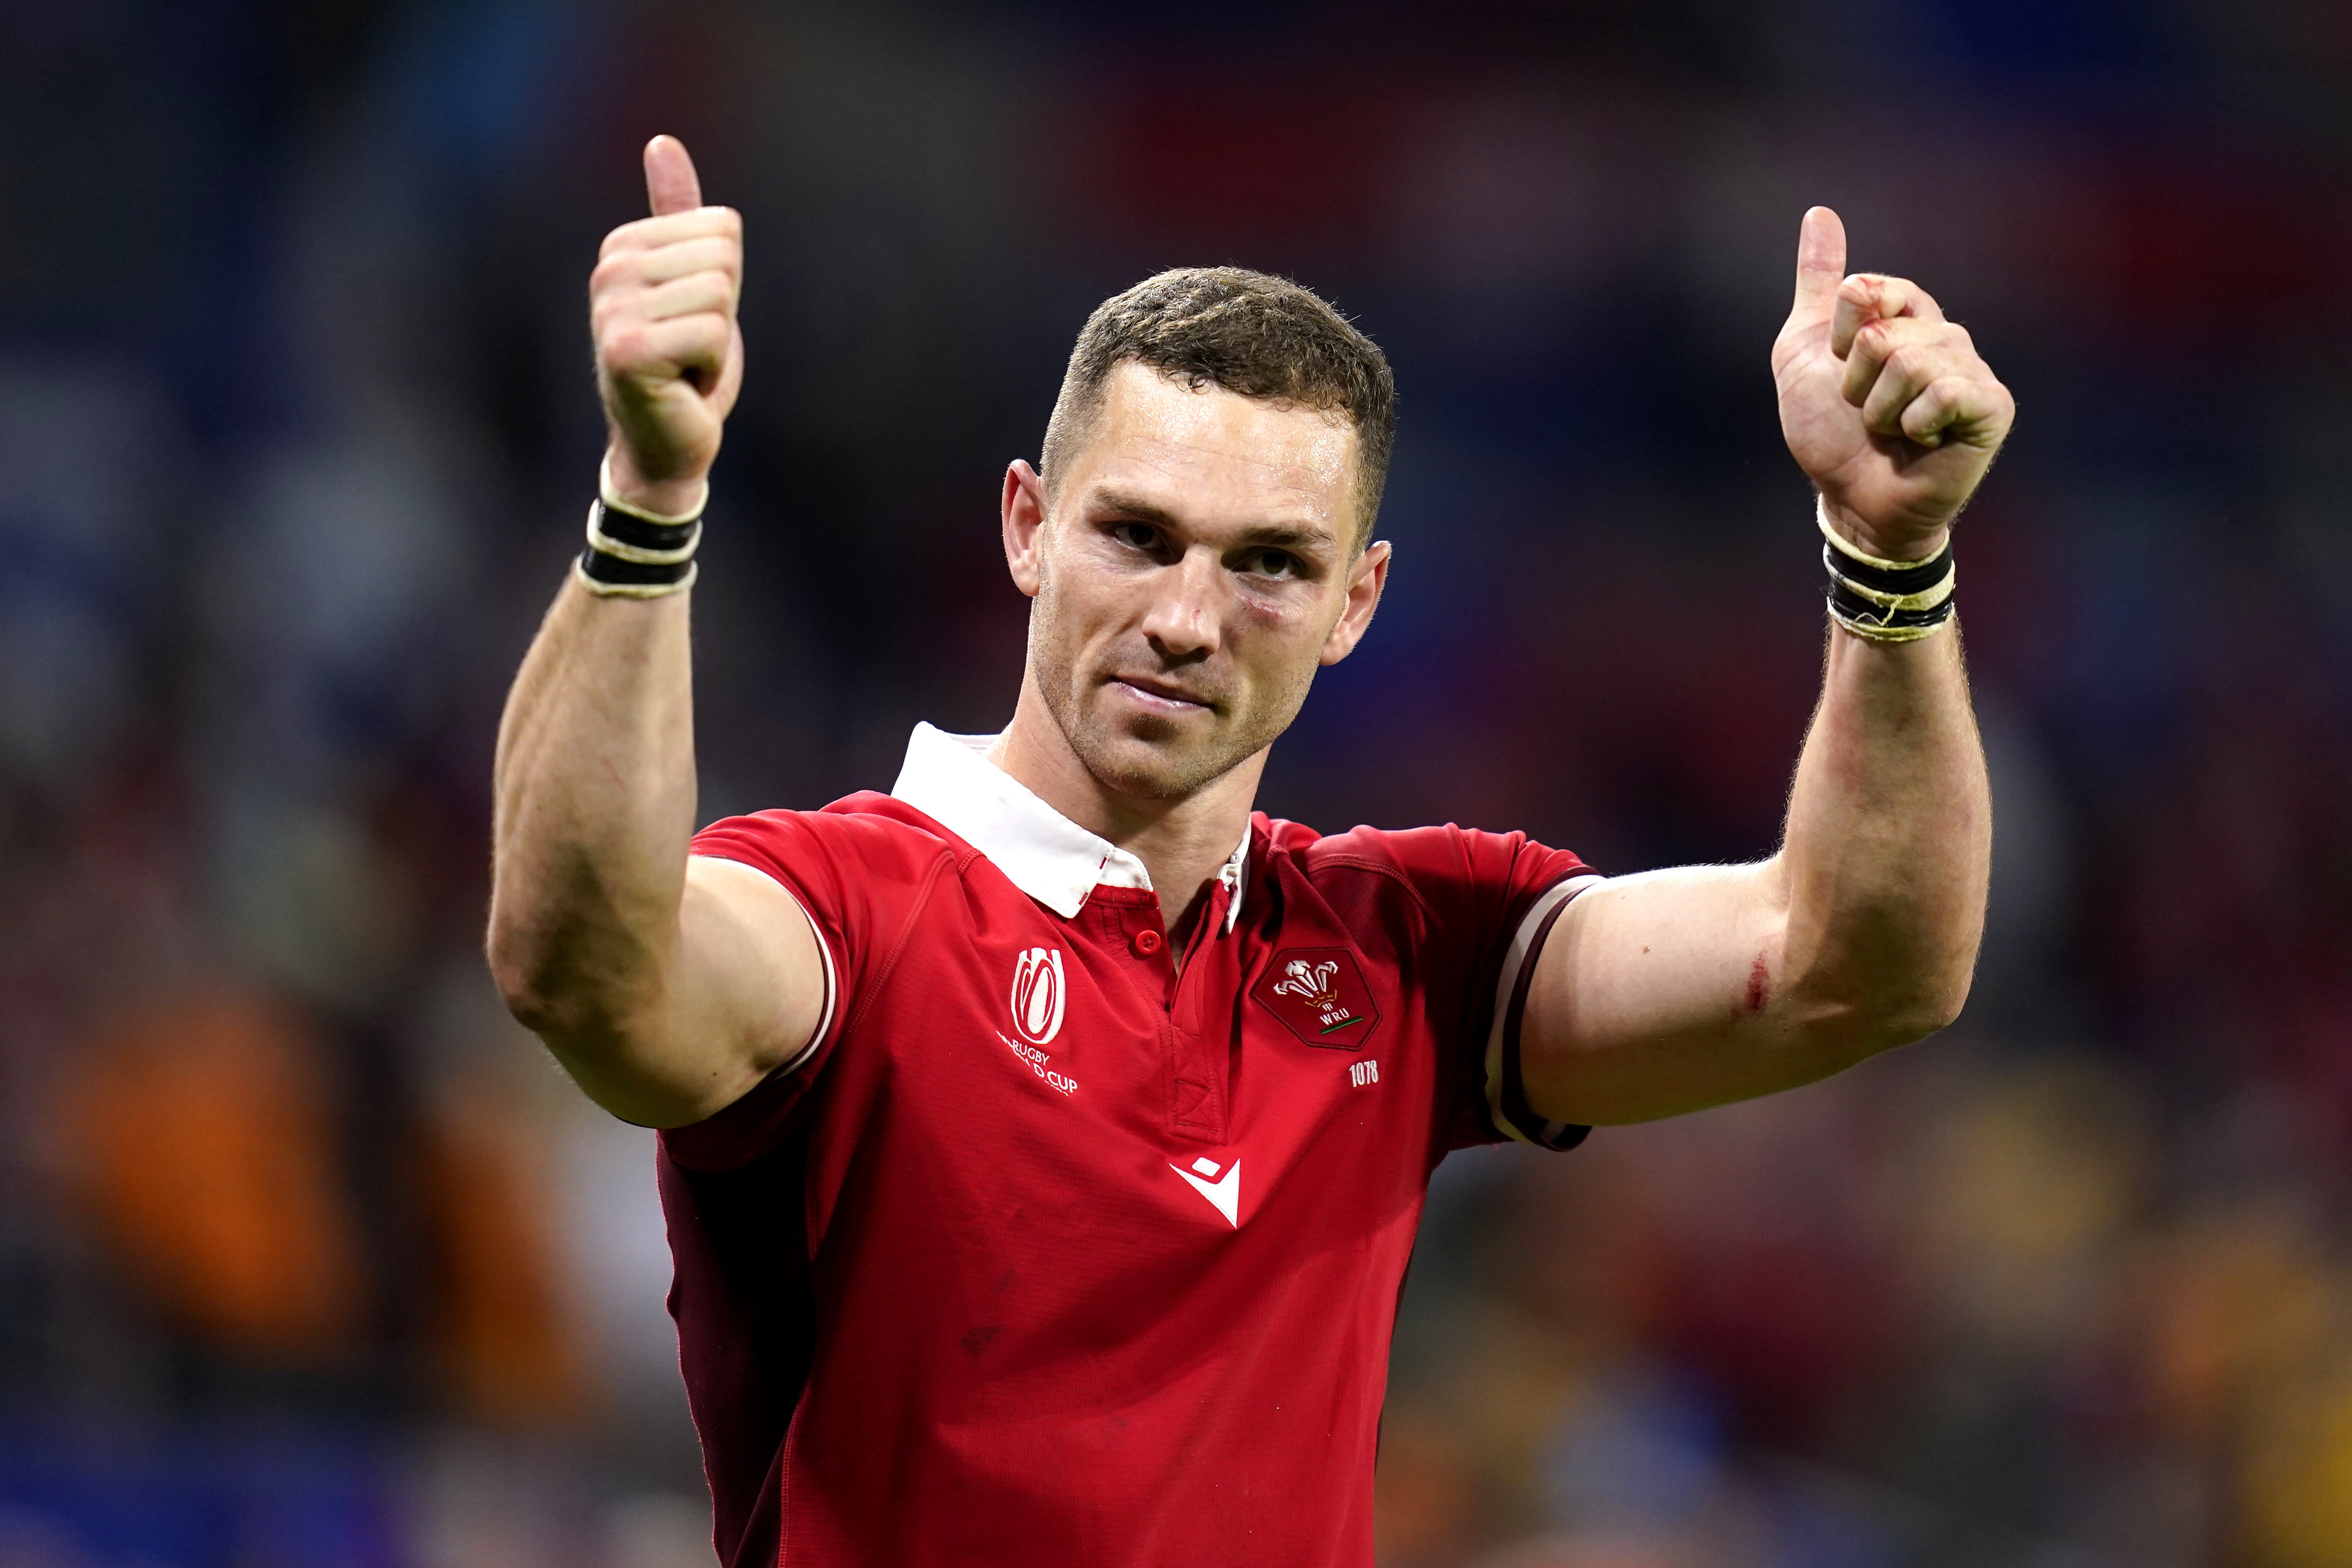 George North is hanging up his boots